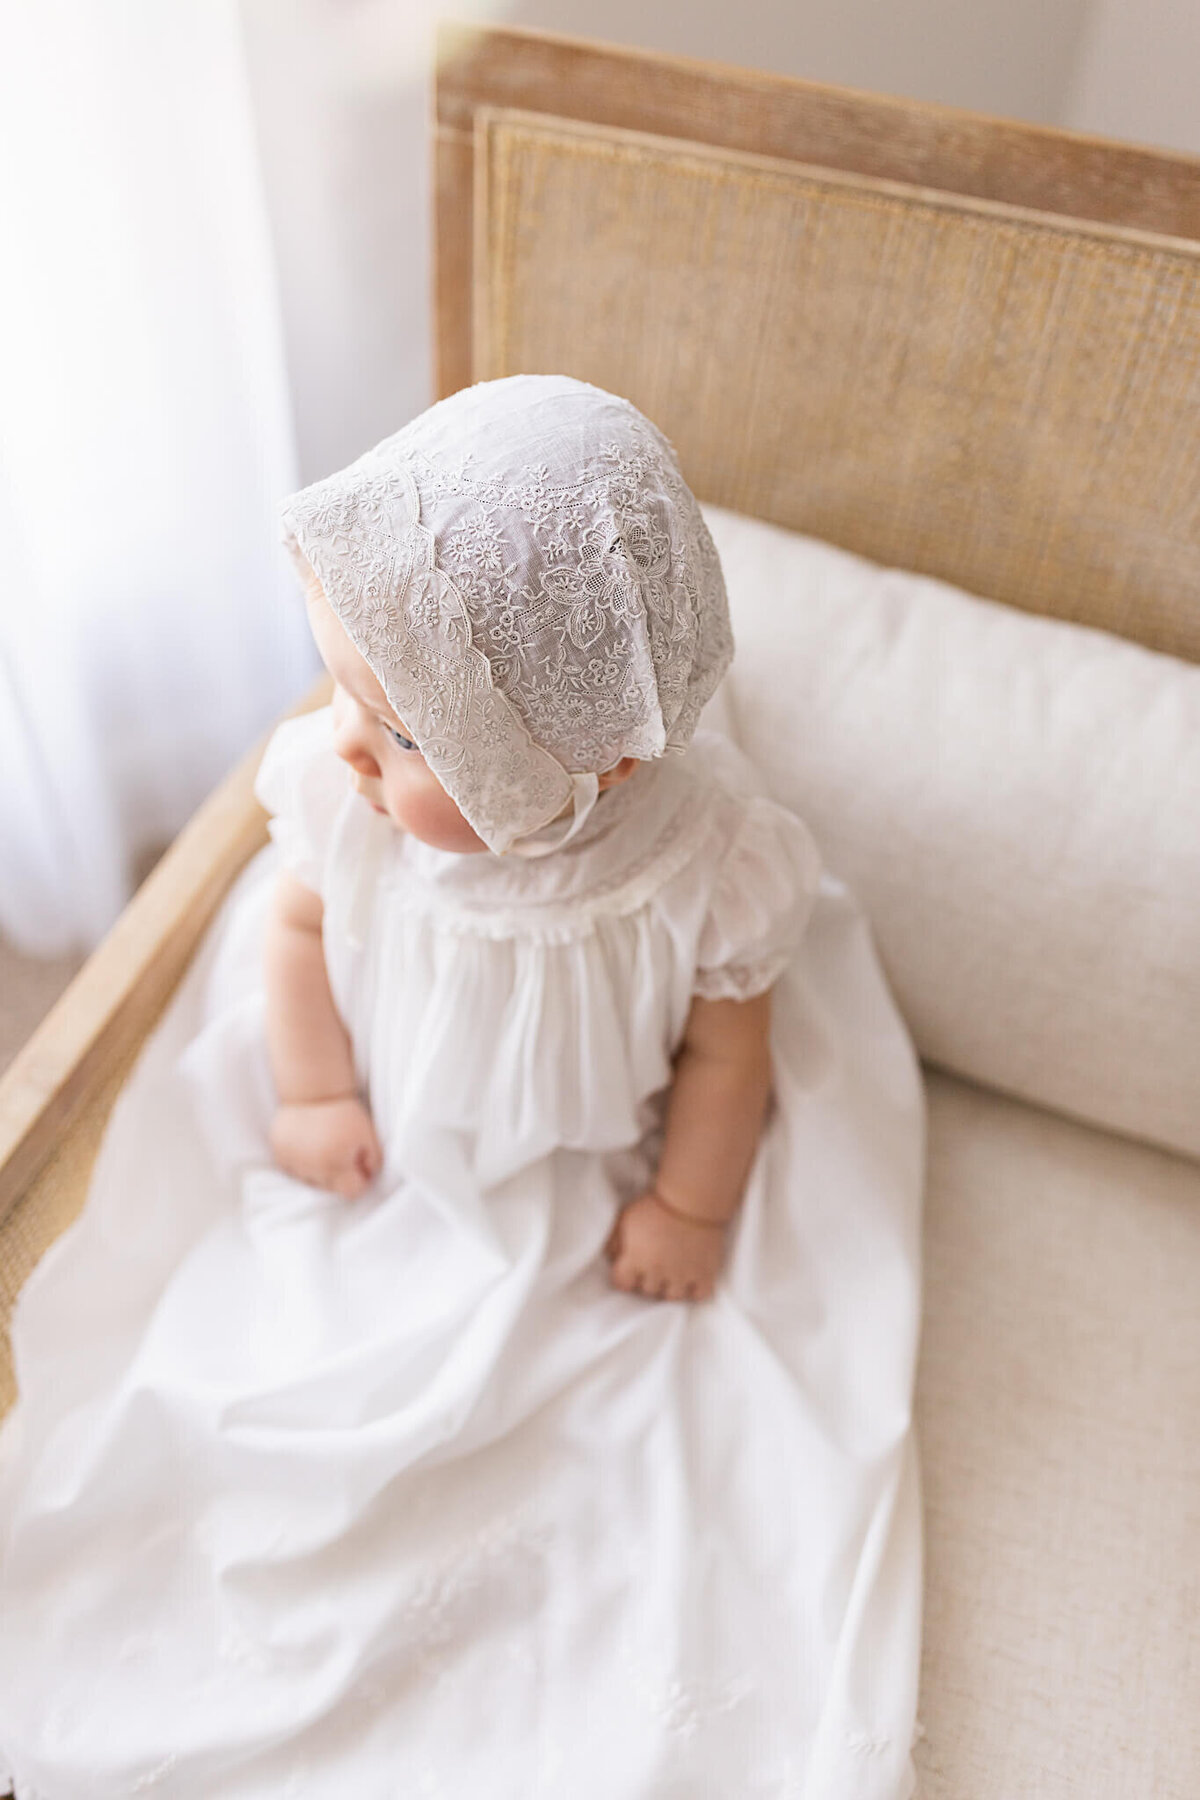 Baby girl sits in a chair wearing a white dress and bonnet